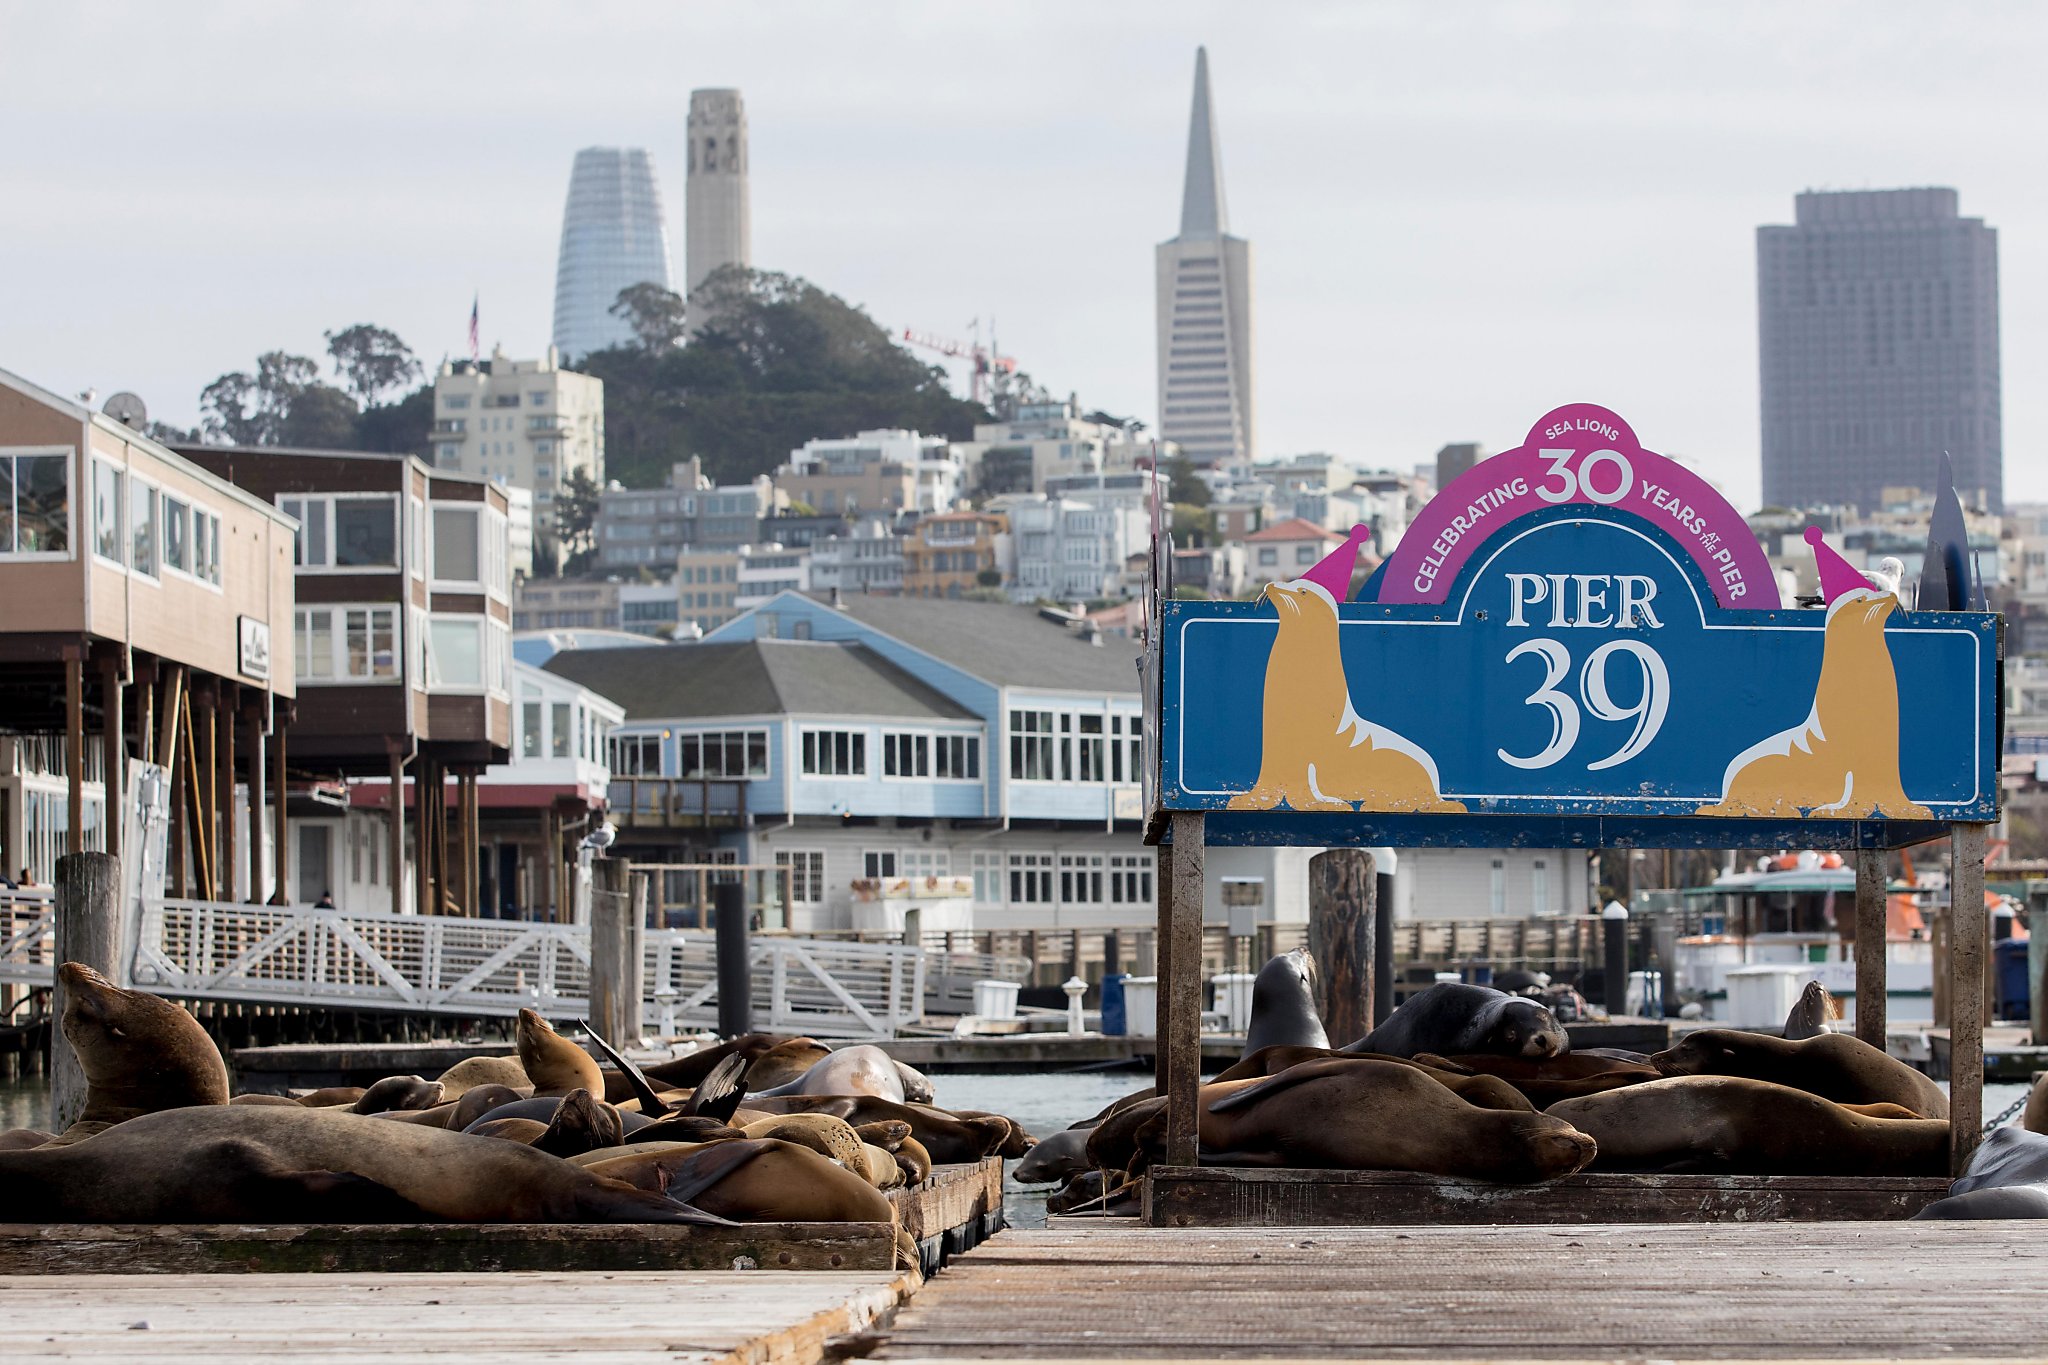 Visiting the Sea Lions of San Francisco's Pier 39 - The Aussie Flashpacker